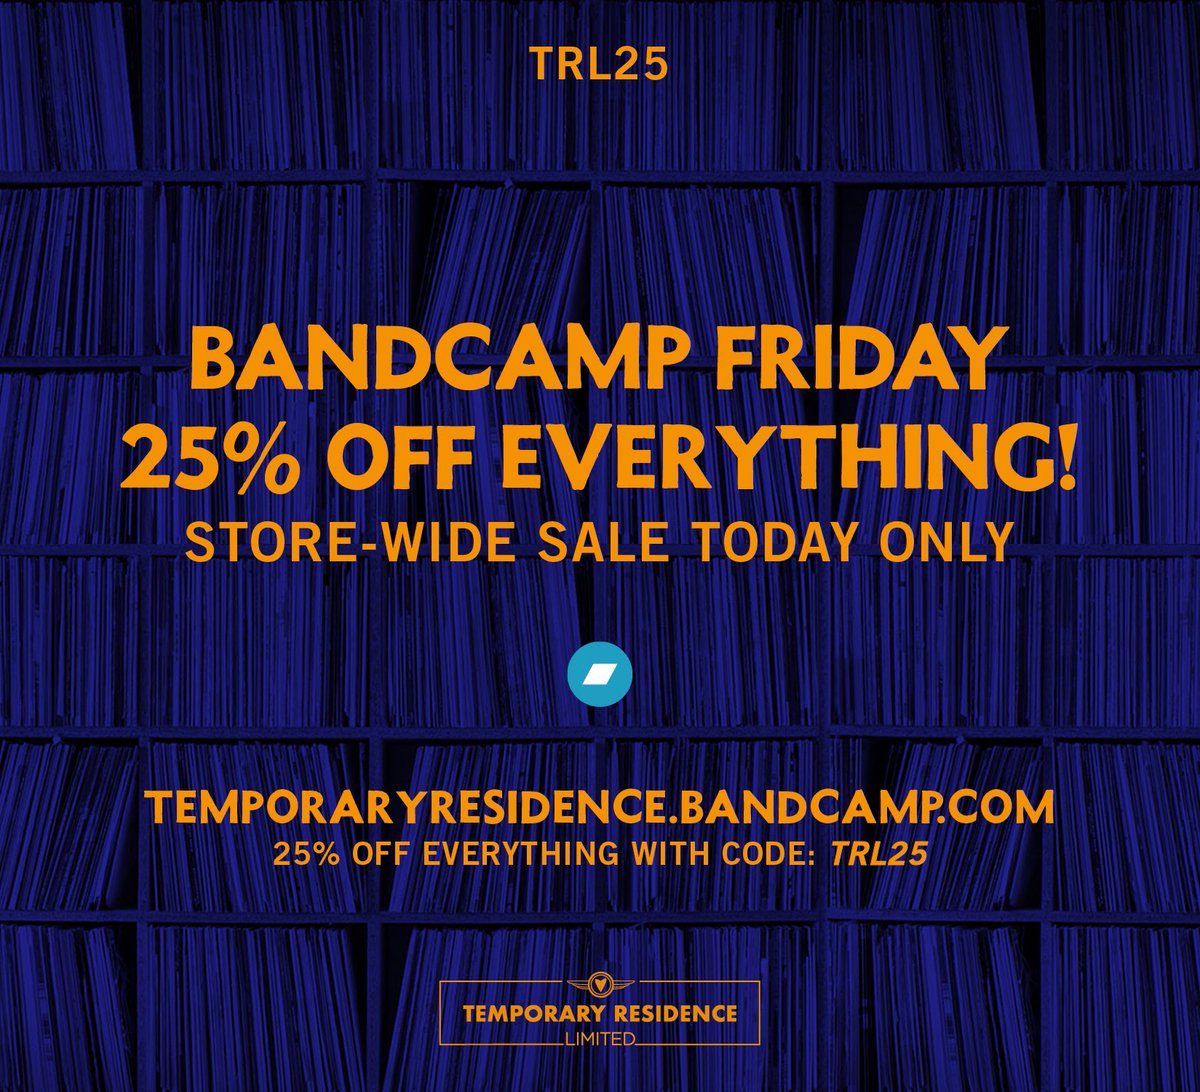 Today is Bandcamp Friday! To mark the occasion, we are offering 25% OFF our entire Bandcamp store for TODAY ONLY! Use discount code TRL25 to get 25% off of everything you buy. Everything? Everything! temporaryresidence.bandcamp.com Your support means everything. Thank you.